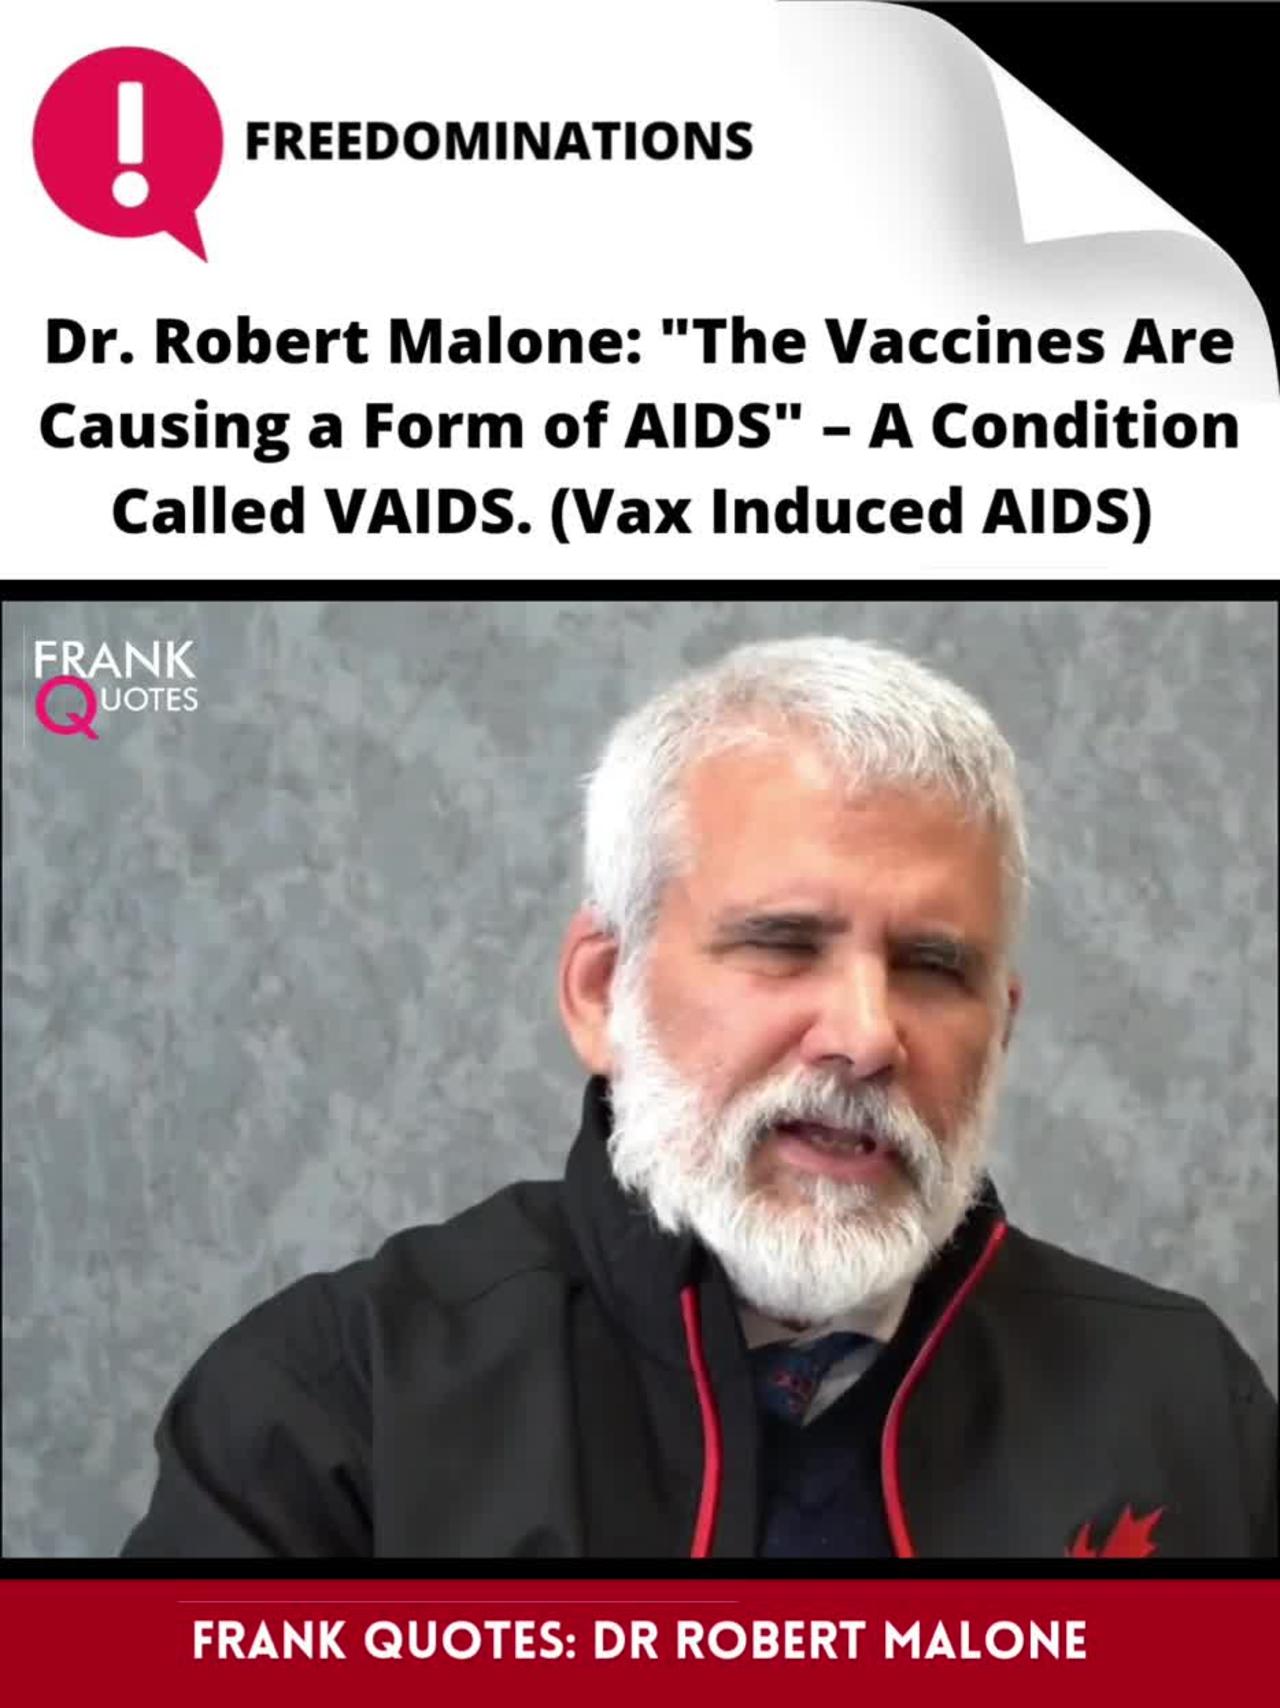 Dr. Robert Malone: "The Vaccines Are Causing a Form of AIDS" |  A Vax induced AIDS 💉 (VAIDS)